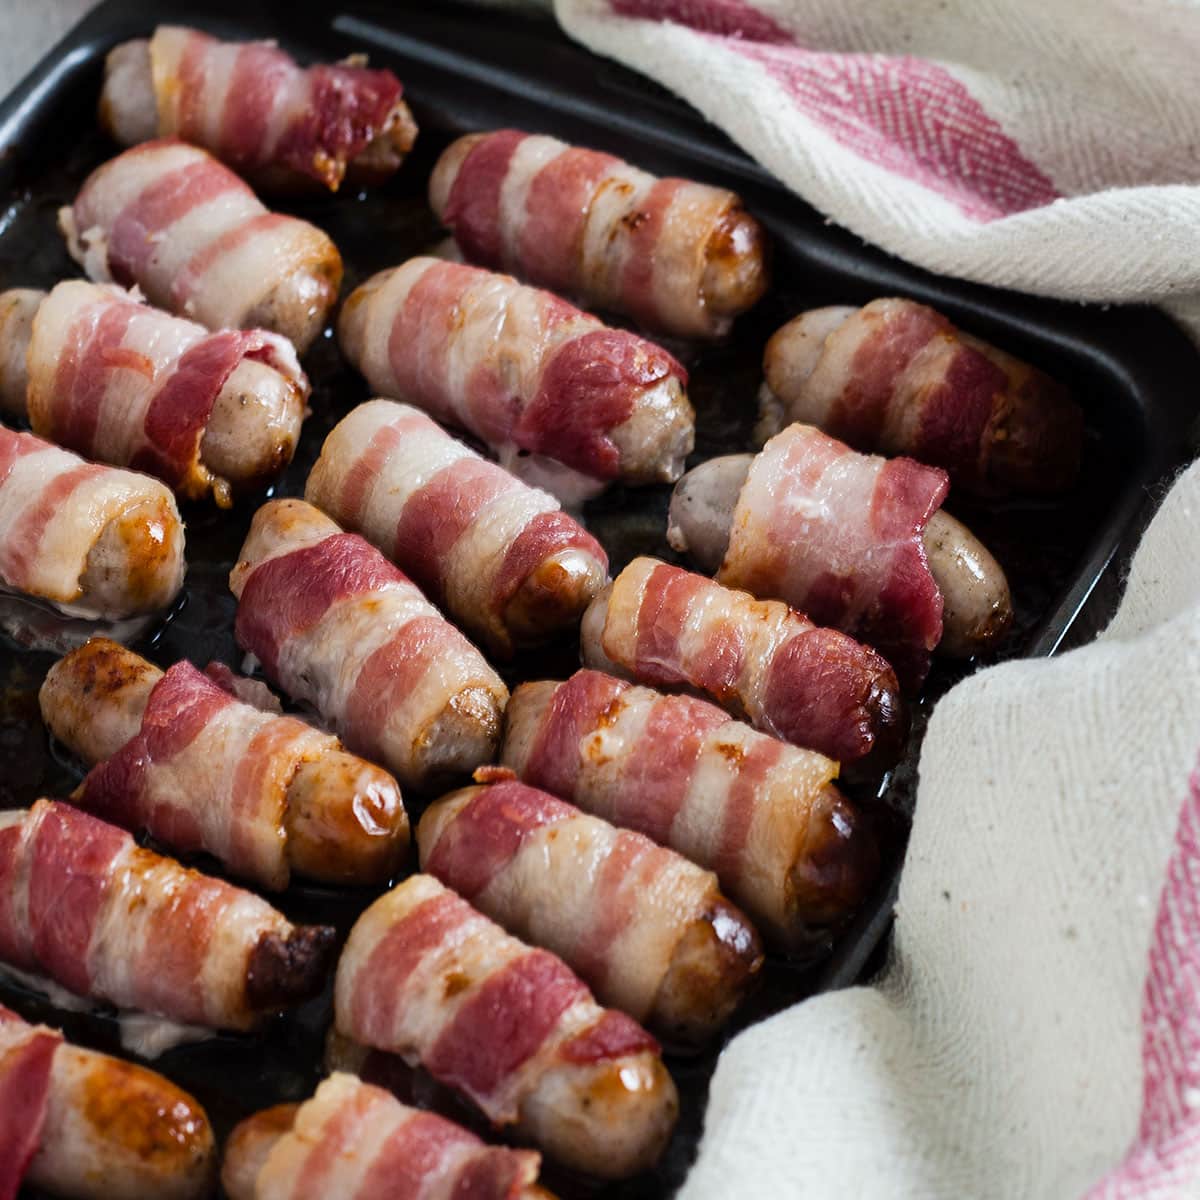 tray of pigs in blankets